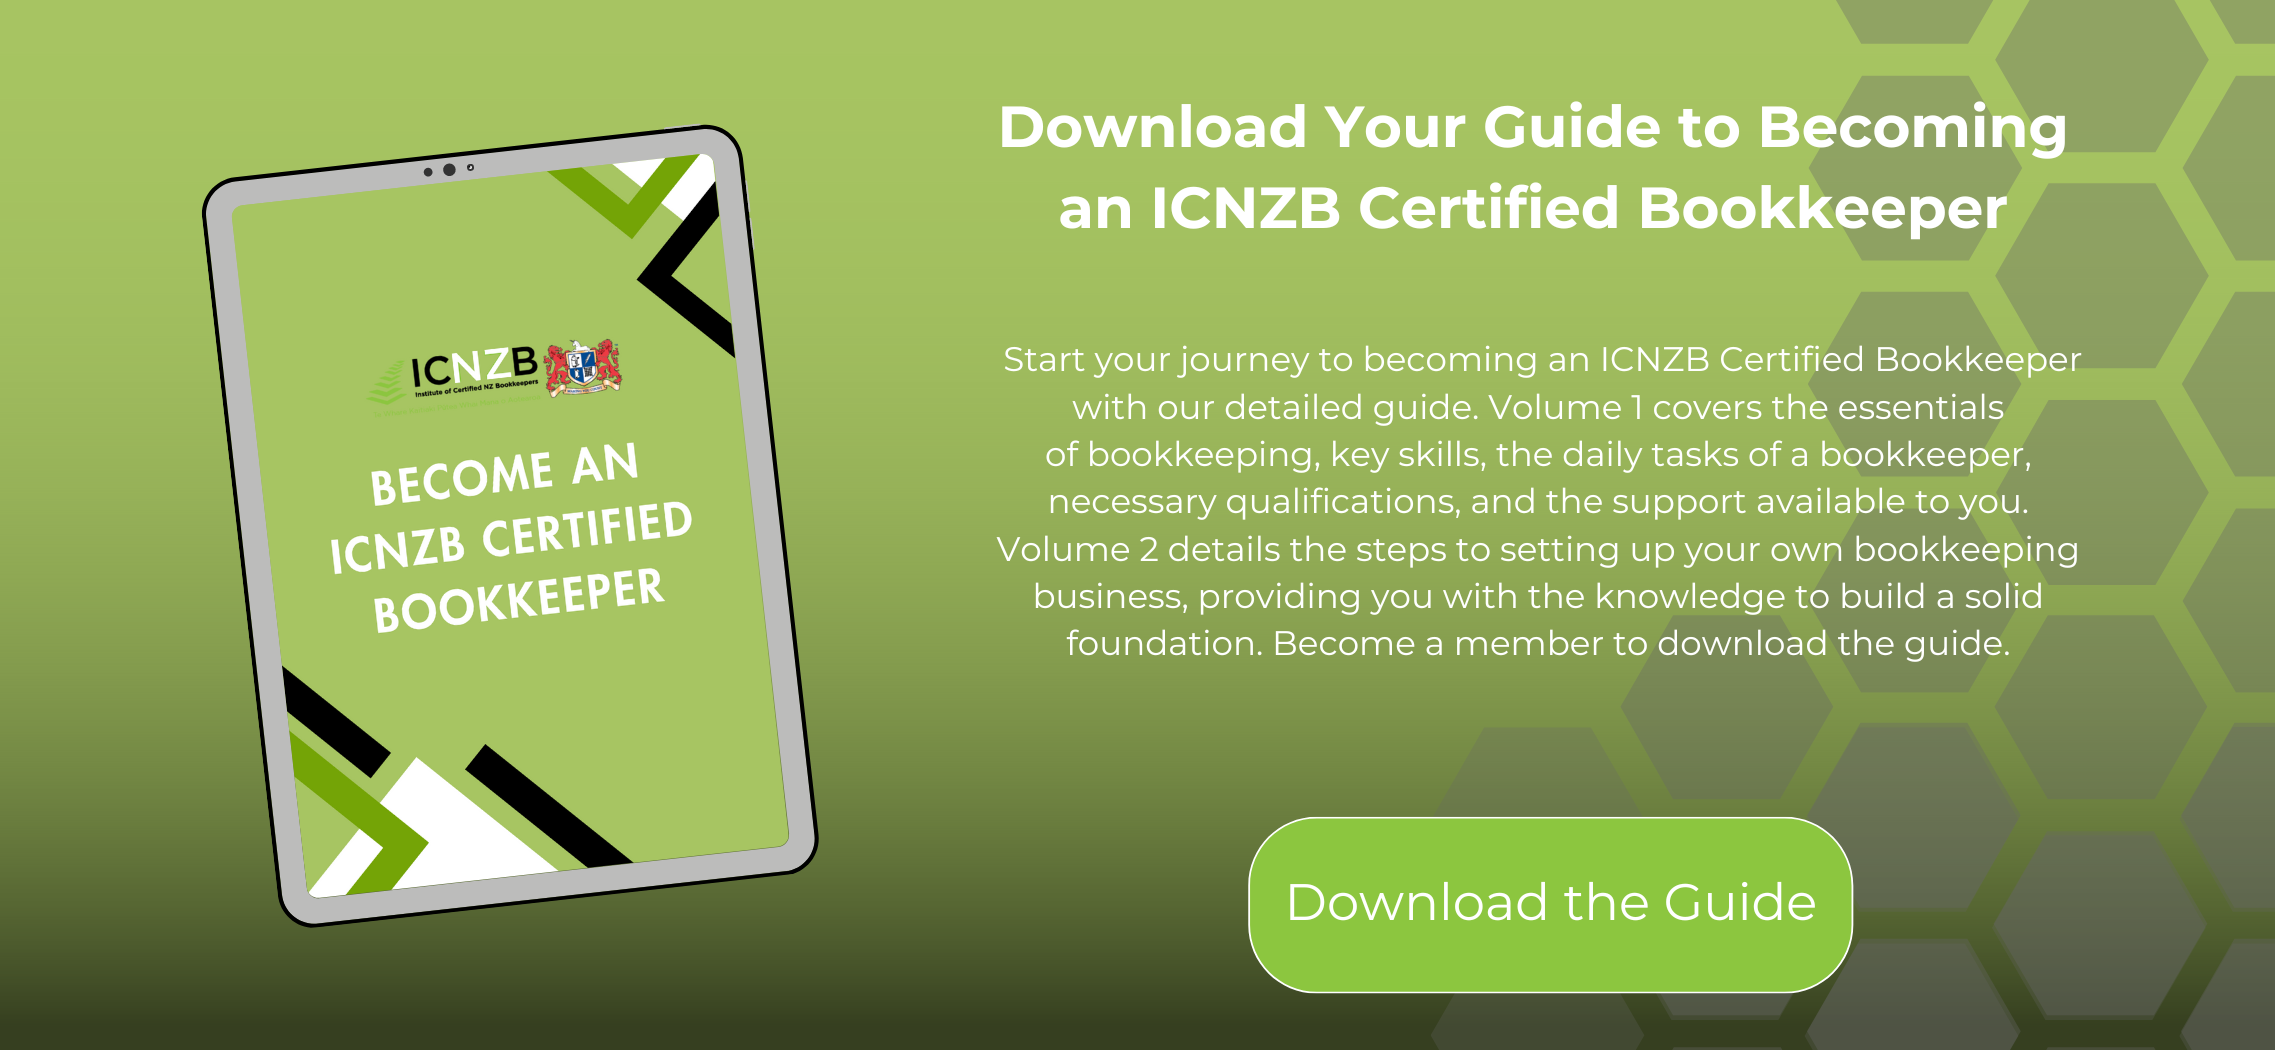 Download your guide to becoming certifed